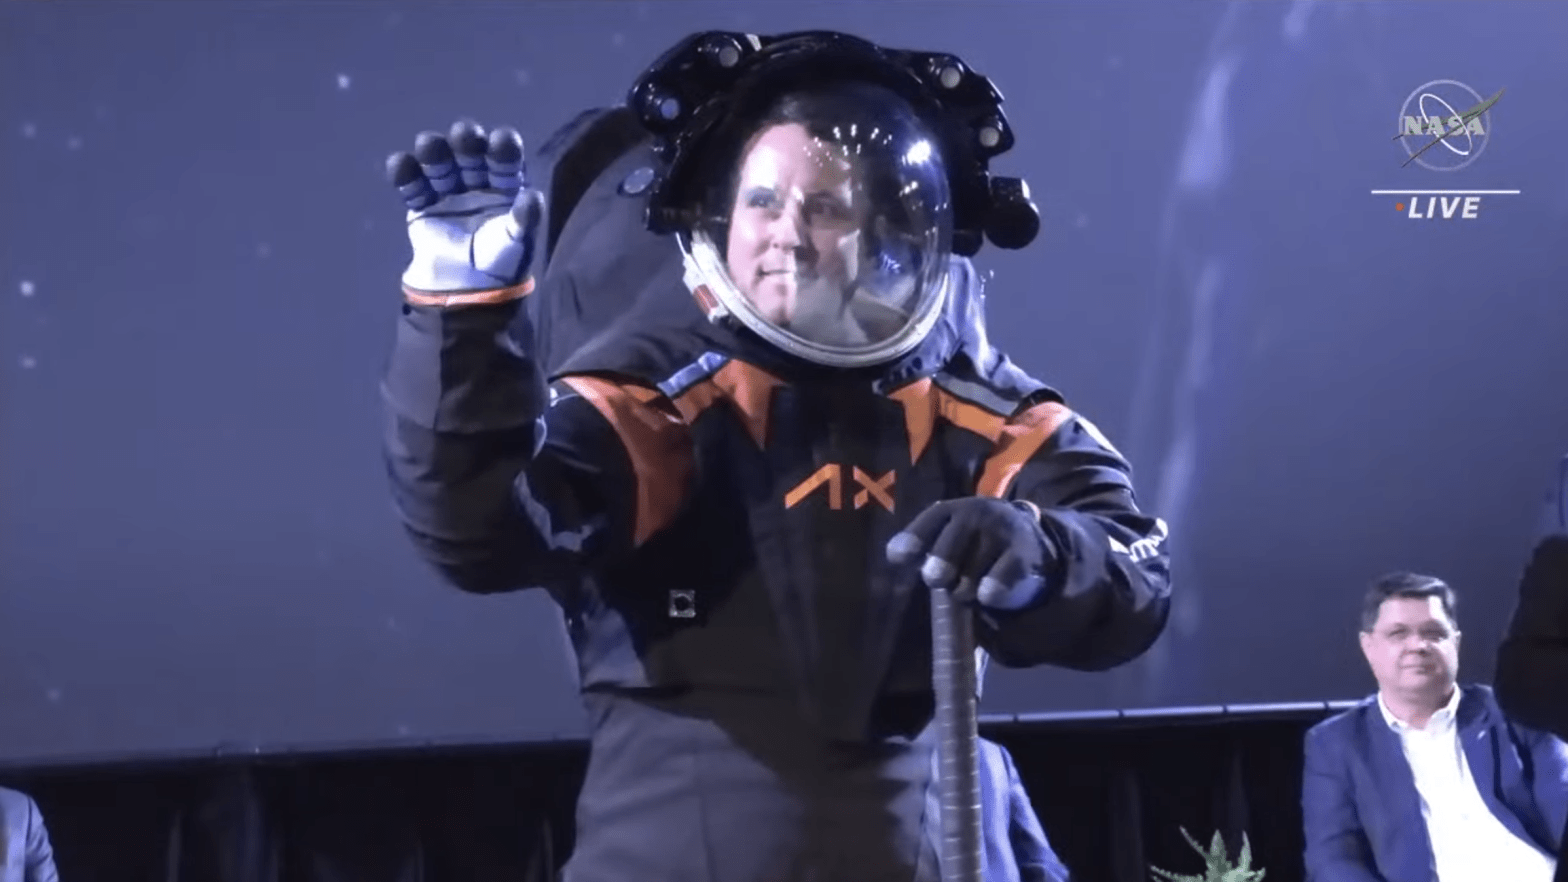 Axiom engineer Jim Stein modelled the spacesuit on stage during the live event.  (Screenshot: NASA TV)